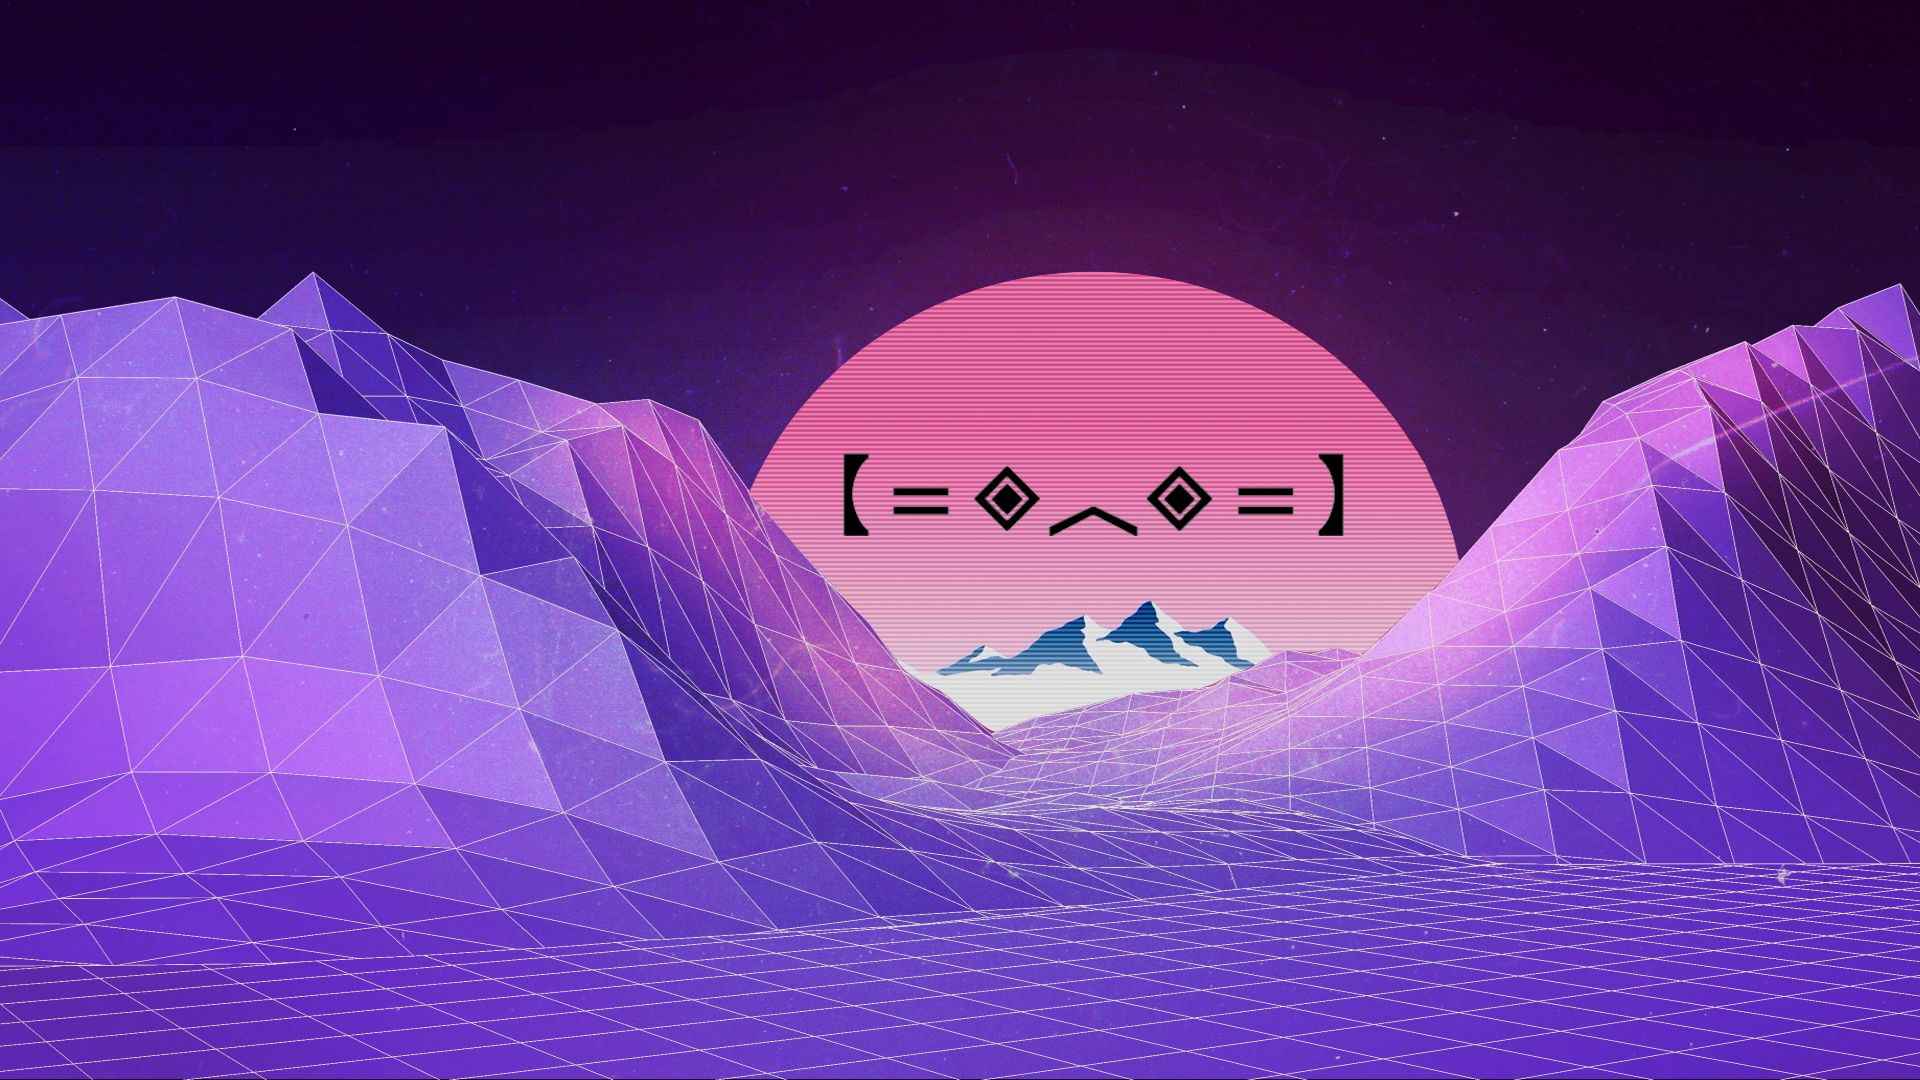 1920x1080 Shelter Porter Robinson Wallpapers Top Free Shelter Porter Robinson Backgrounds